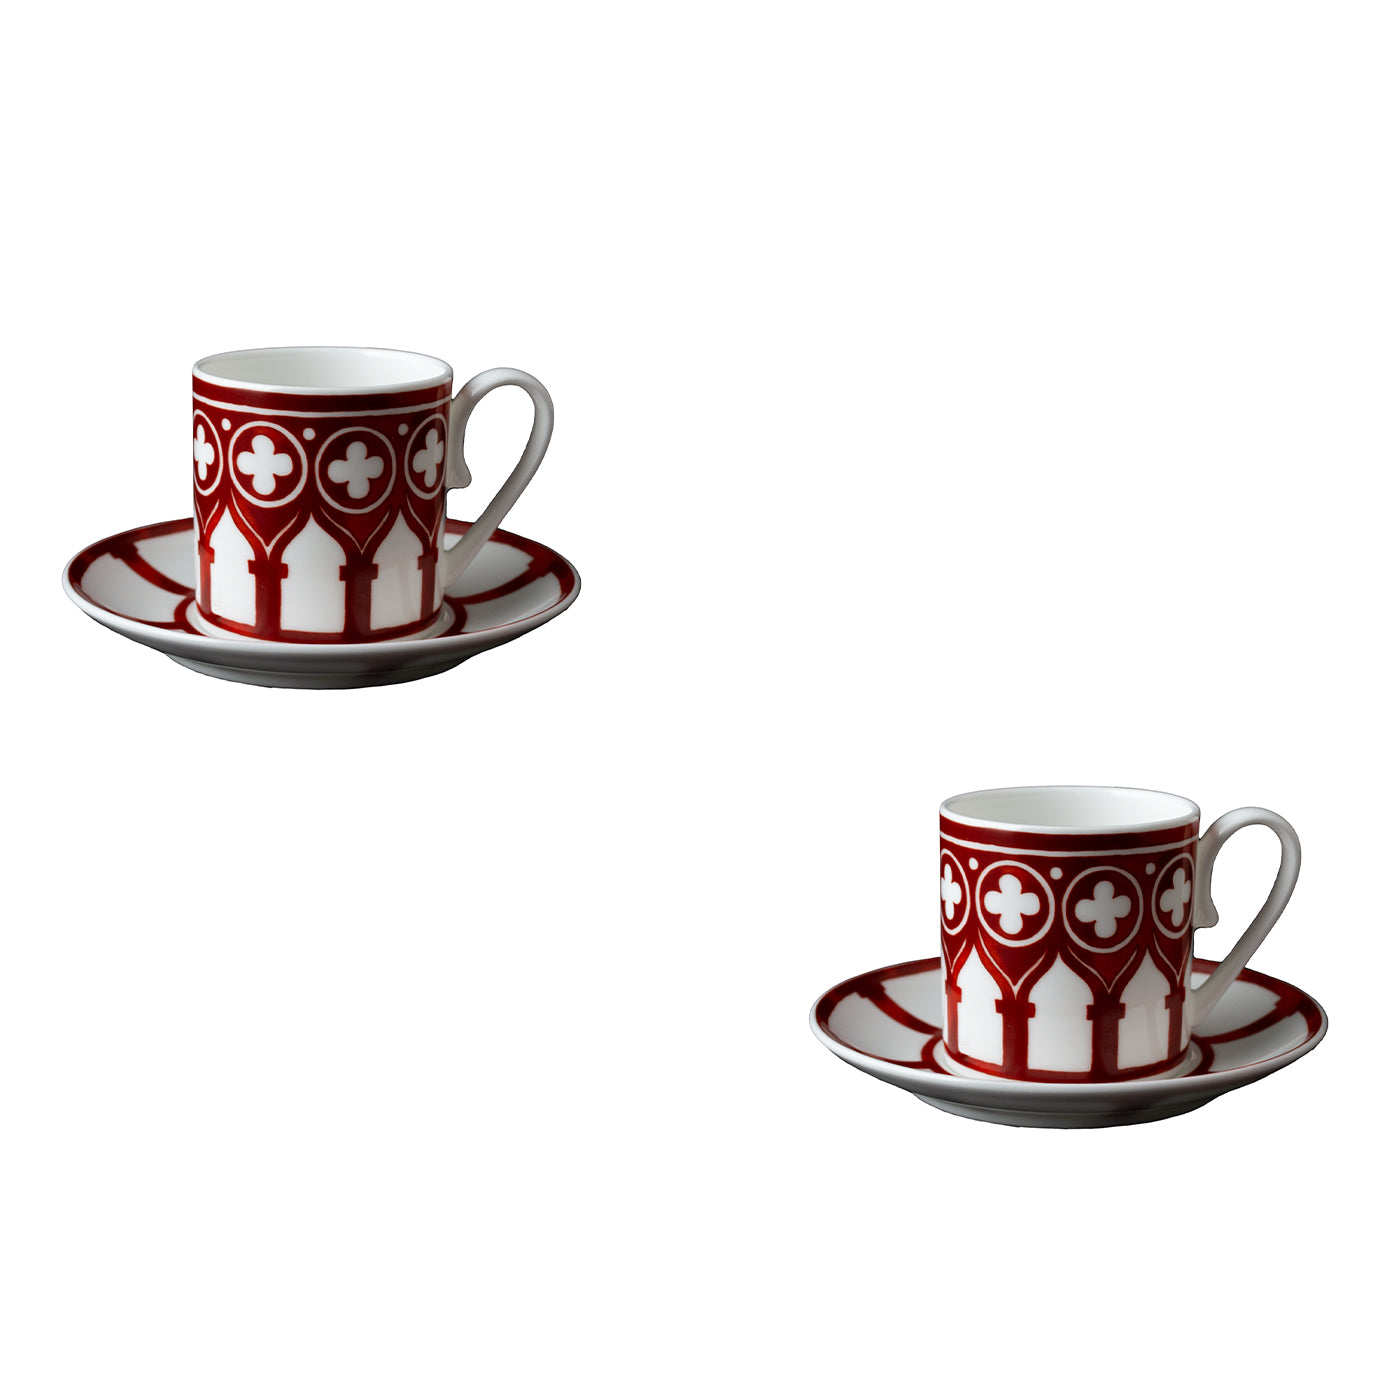 Le Loze dei Bei Palassi Set of 2 Coffee Cups with Saucers - Alternative view 1